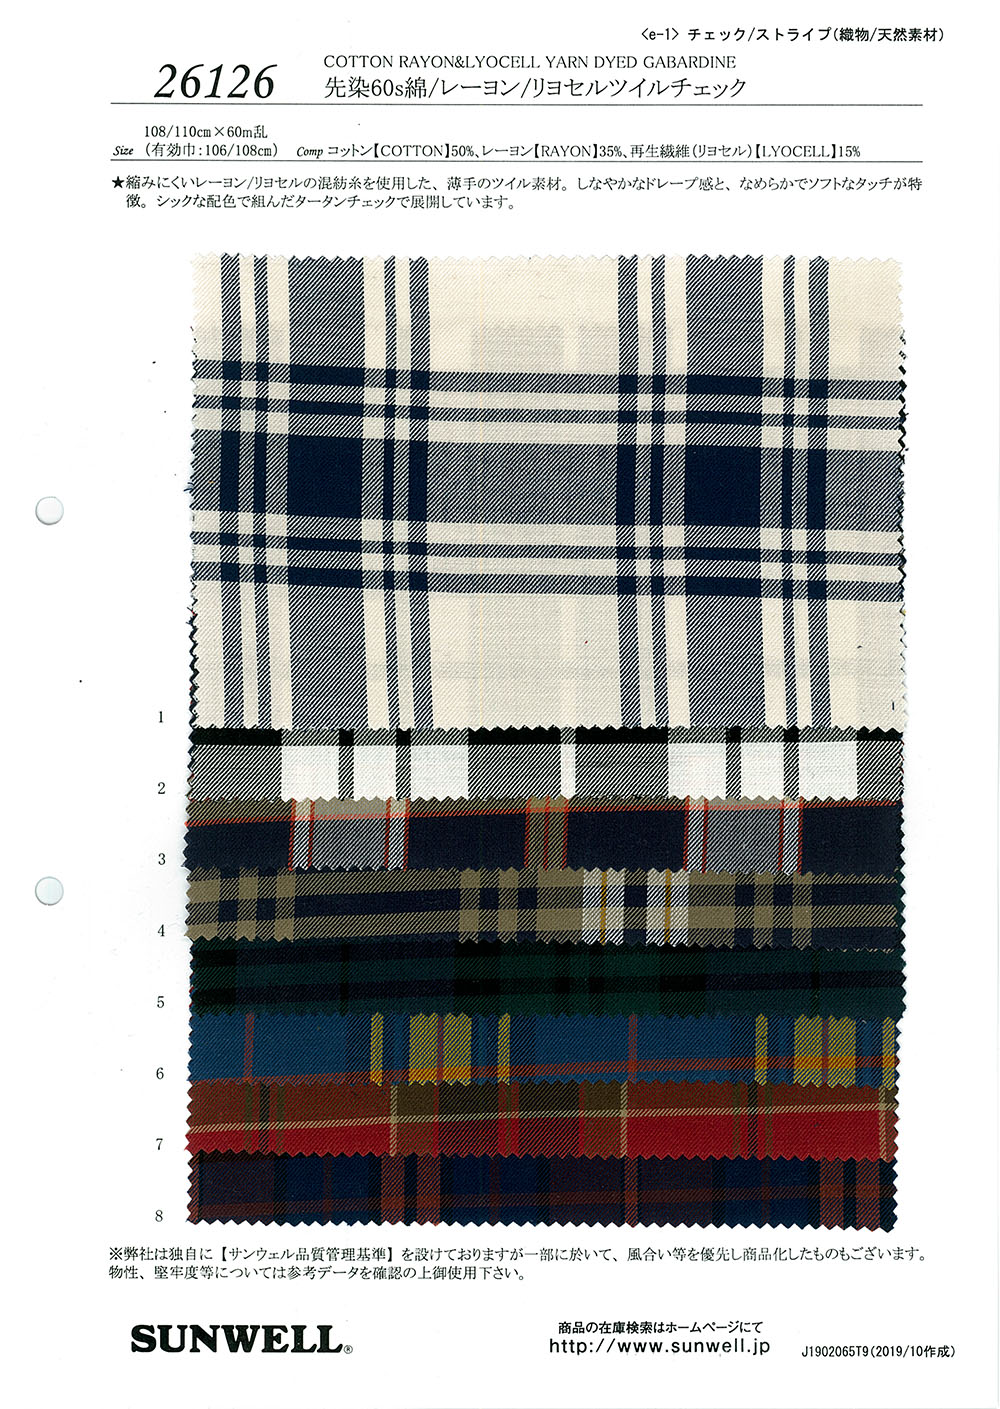 26126 Yarn-dyed 60 Single Thread Cotton/cellulose Twill Check[Textile / Fabric] SUNWELL